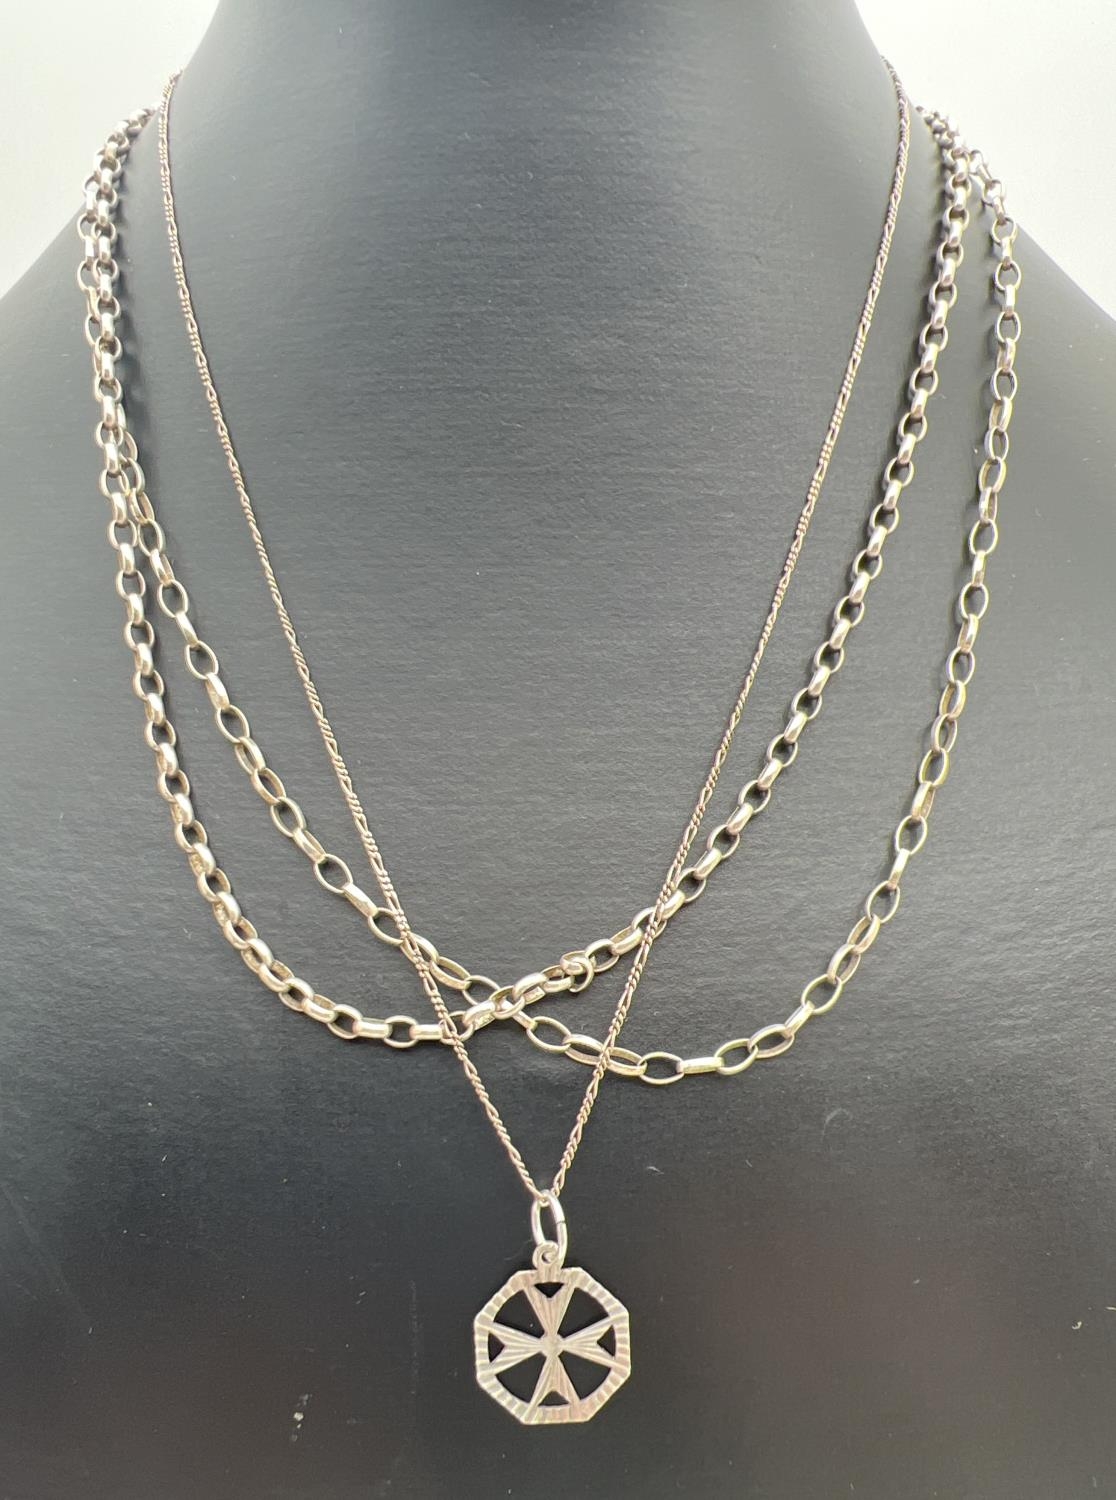 3 silver necklaces, 2 x 18" belcher chains both with spring ring clasps, together with an 18" fine